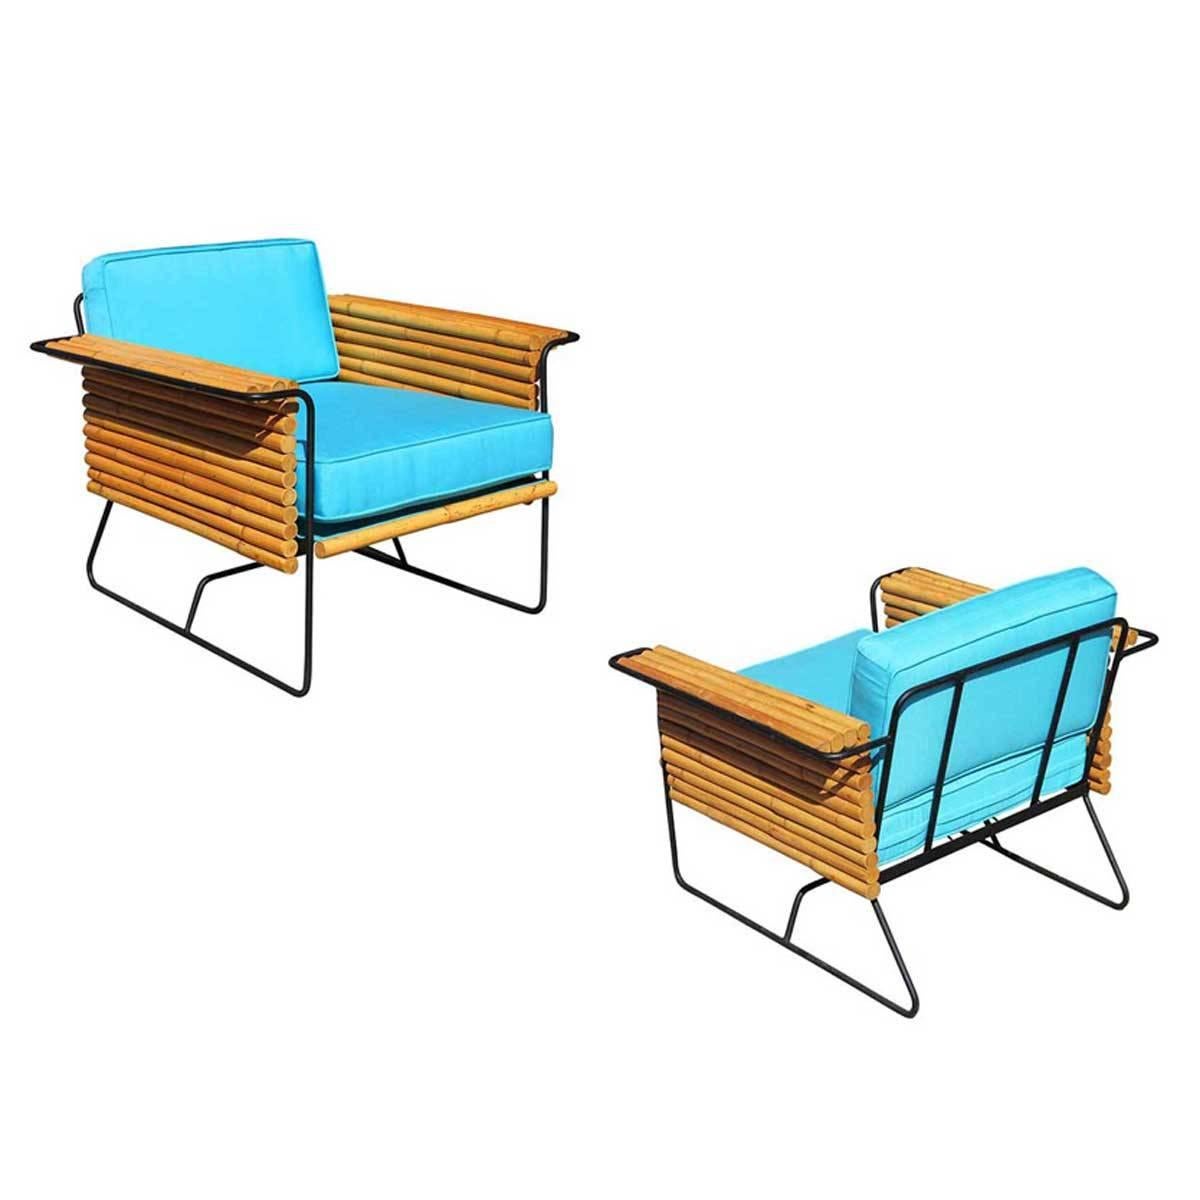 Restored Pair of Wroughtan Iron and Rattan Ski Club Chairs by Shirley Ritts